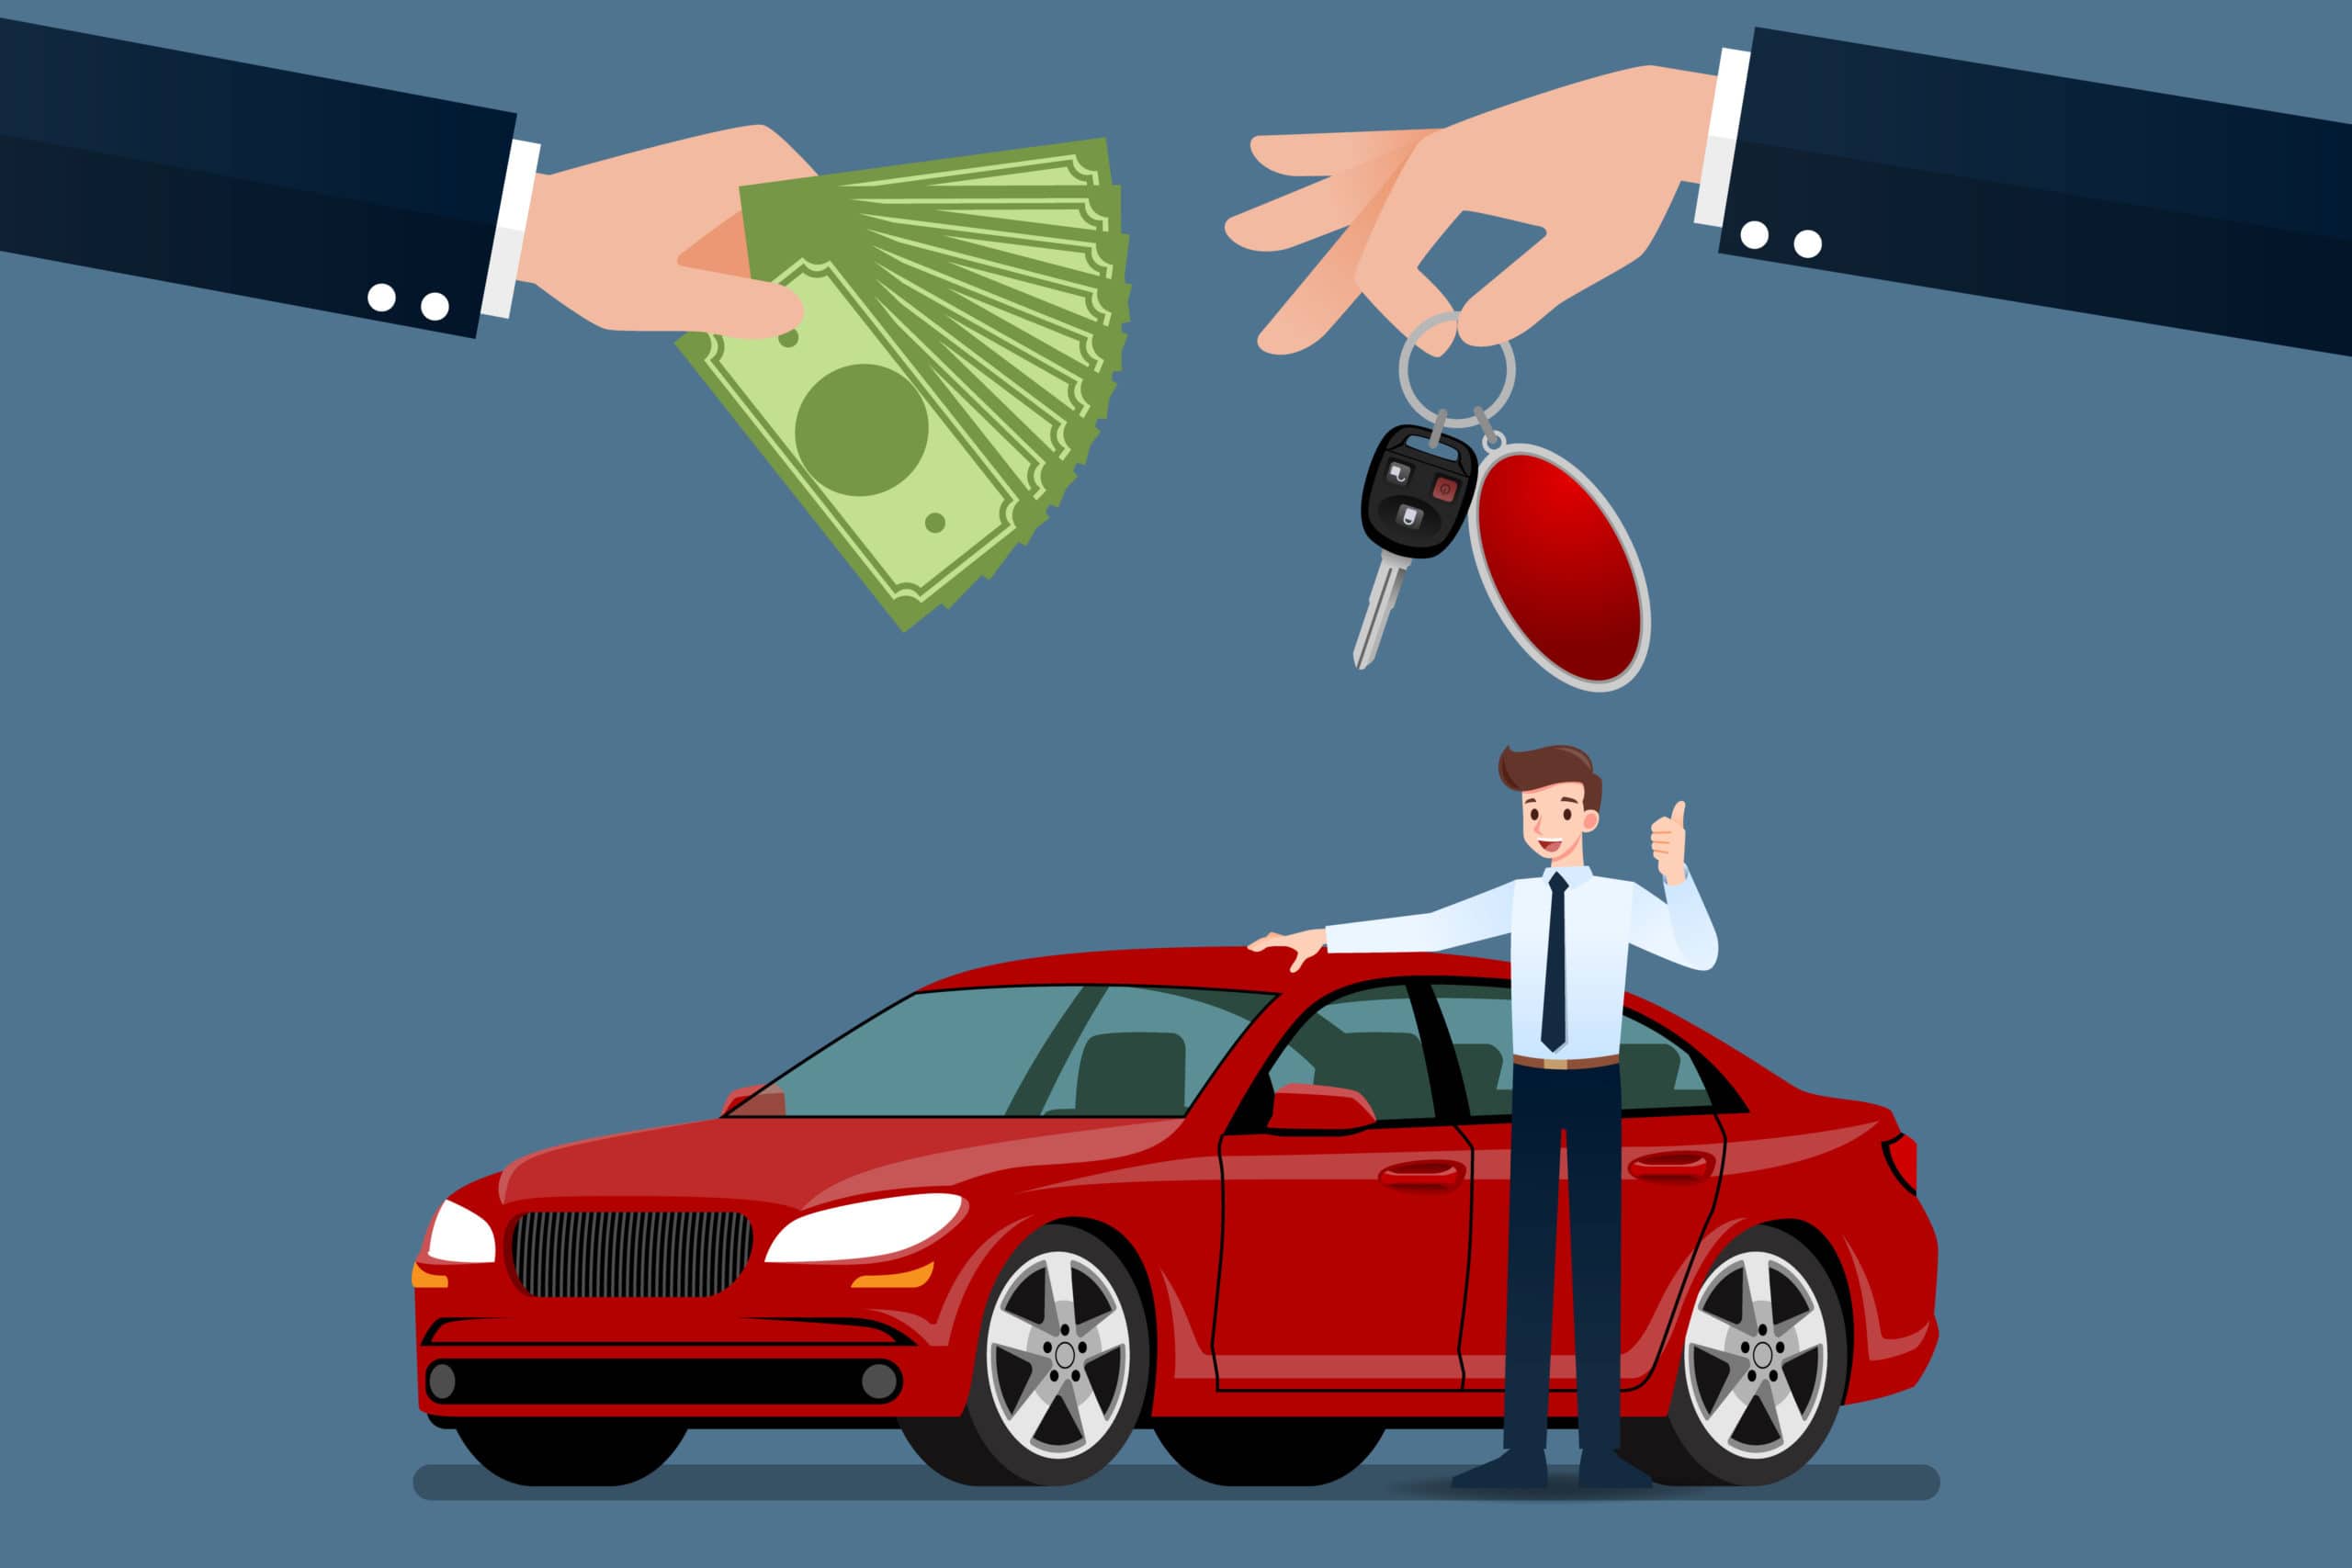 Does My Car Insurance Cover Rental Cars? | Ogletree Financial